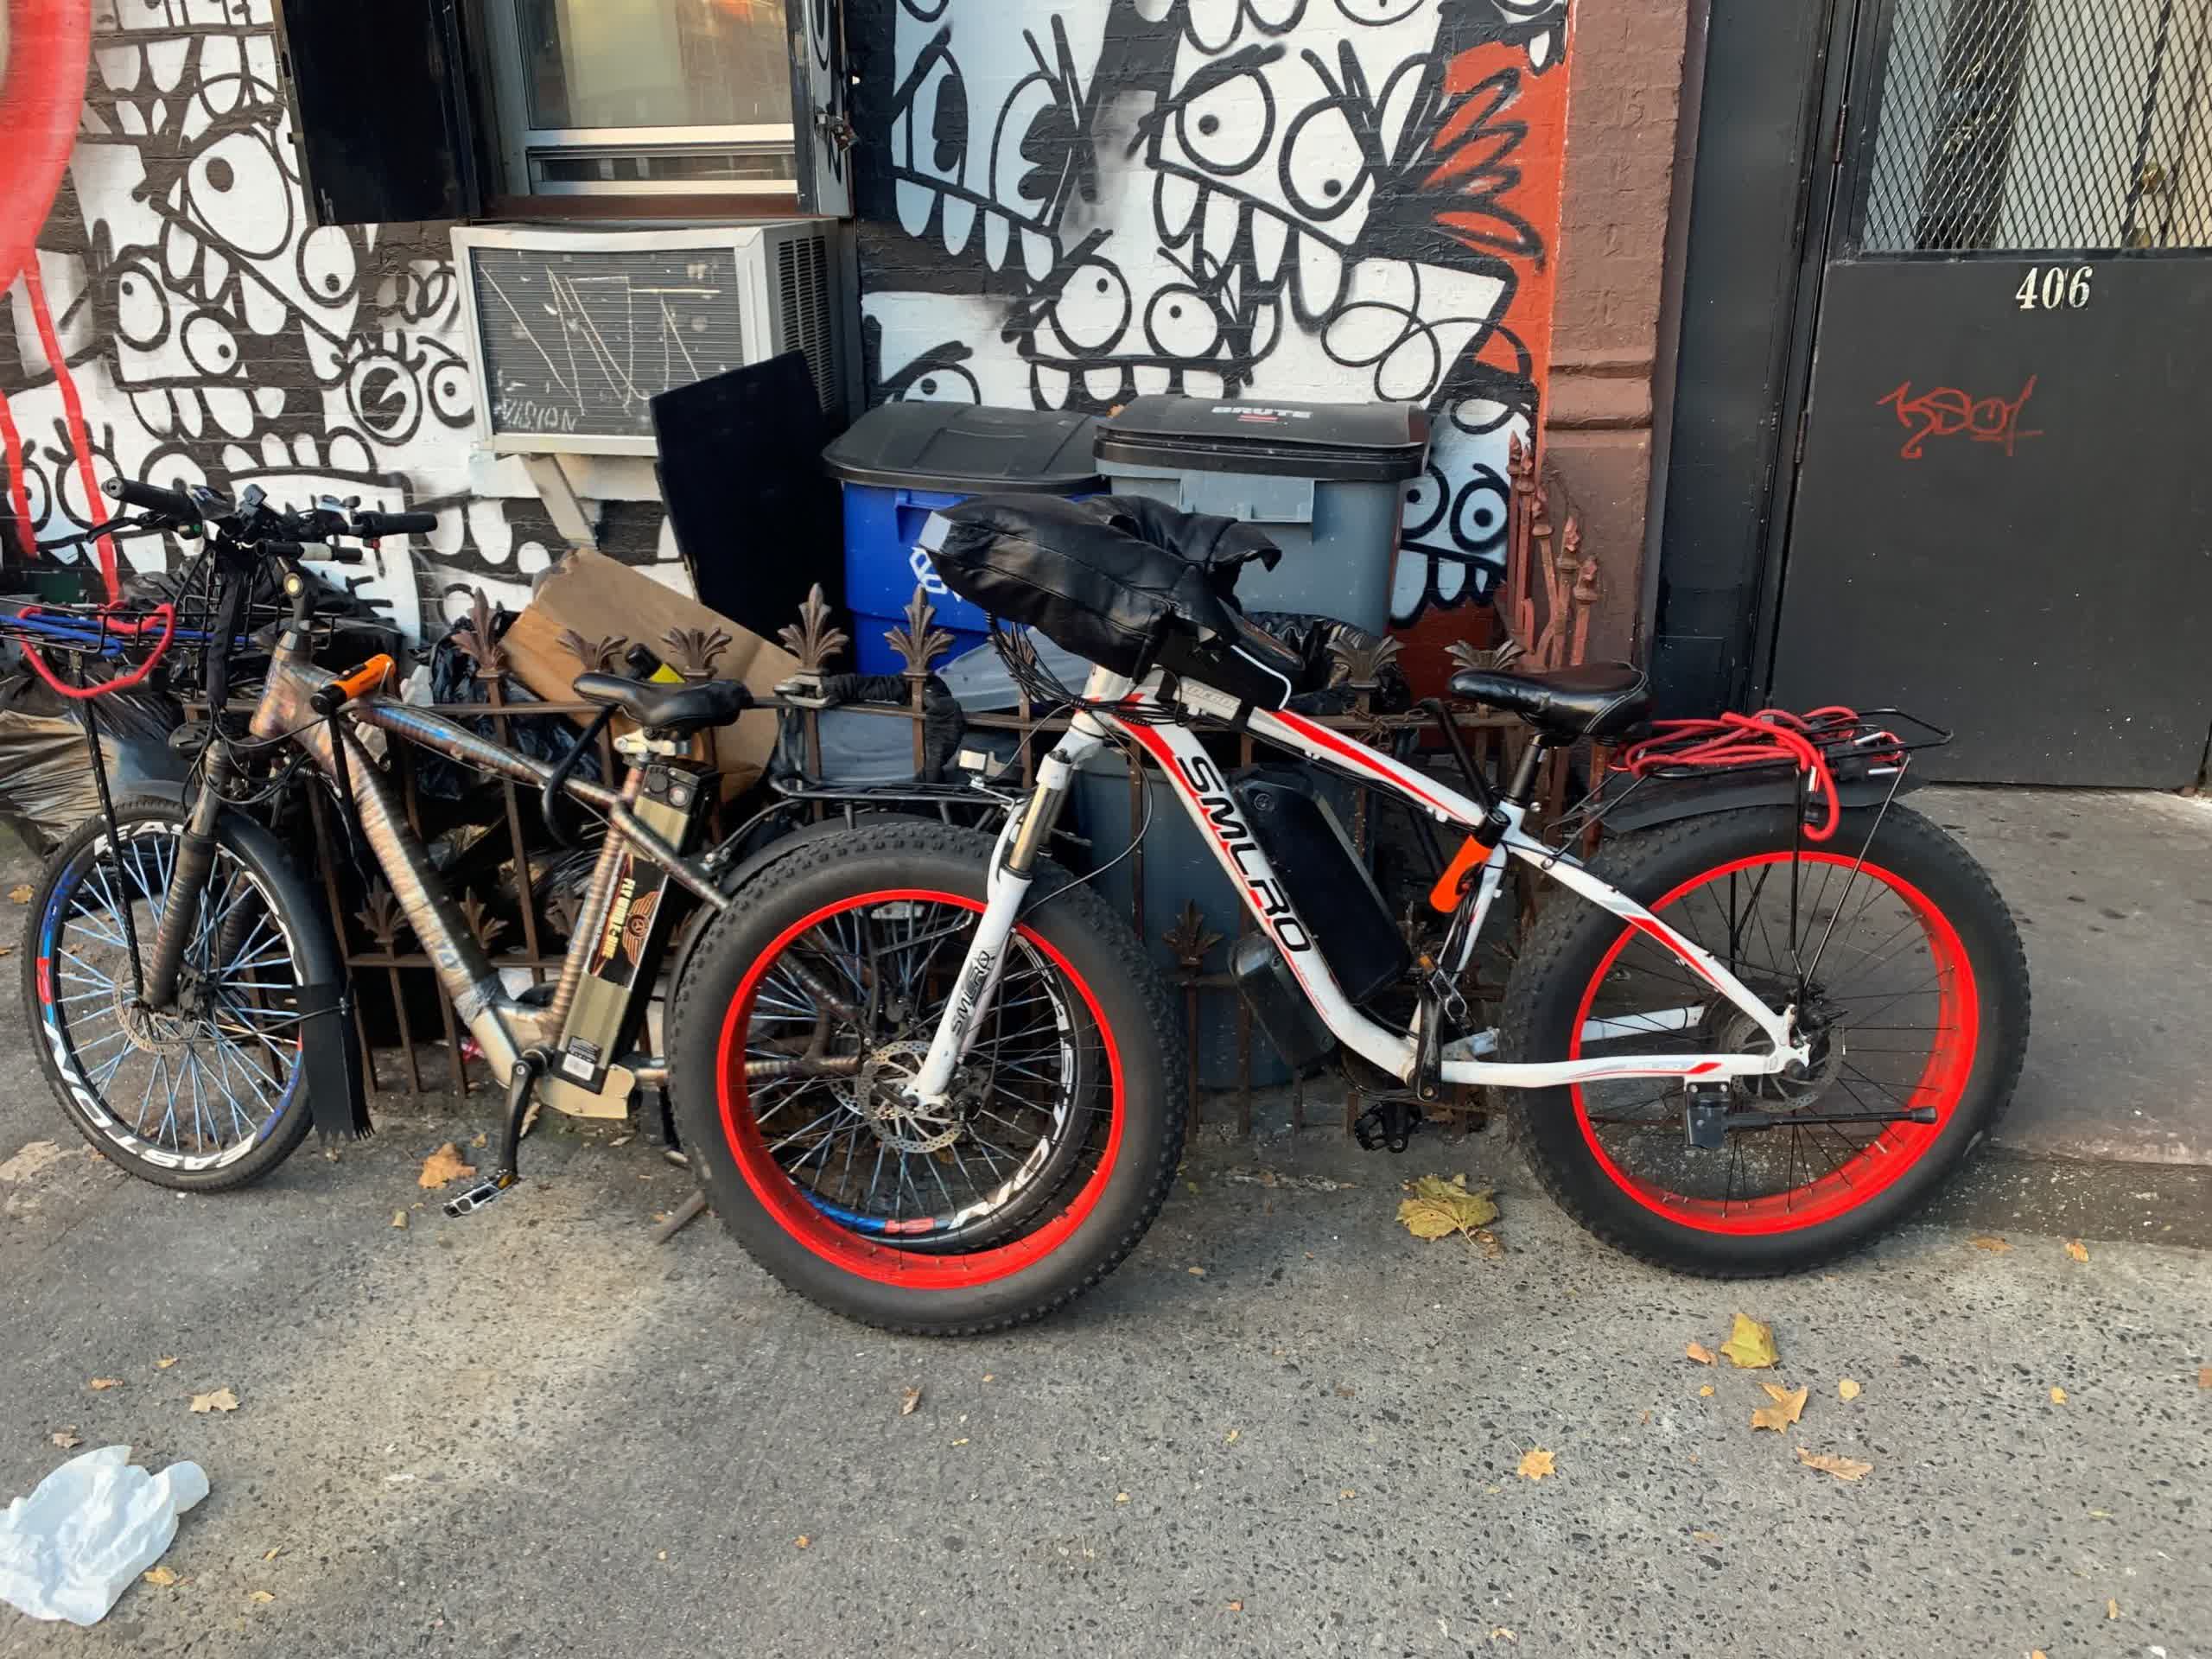 Exploding e-bikes caused significantly more fires in New York City this year